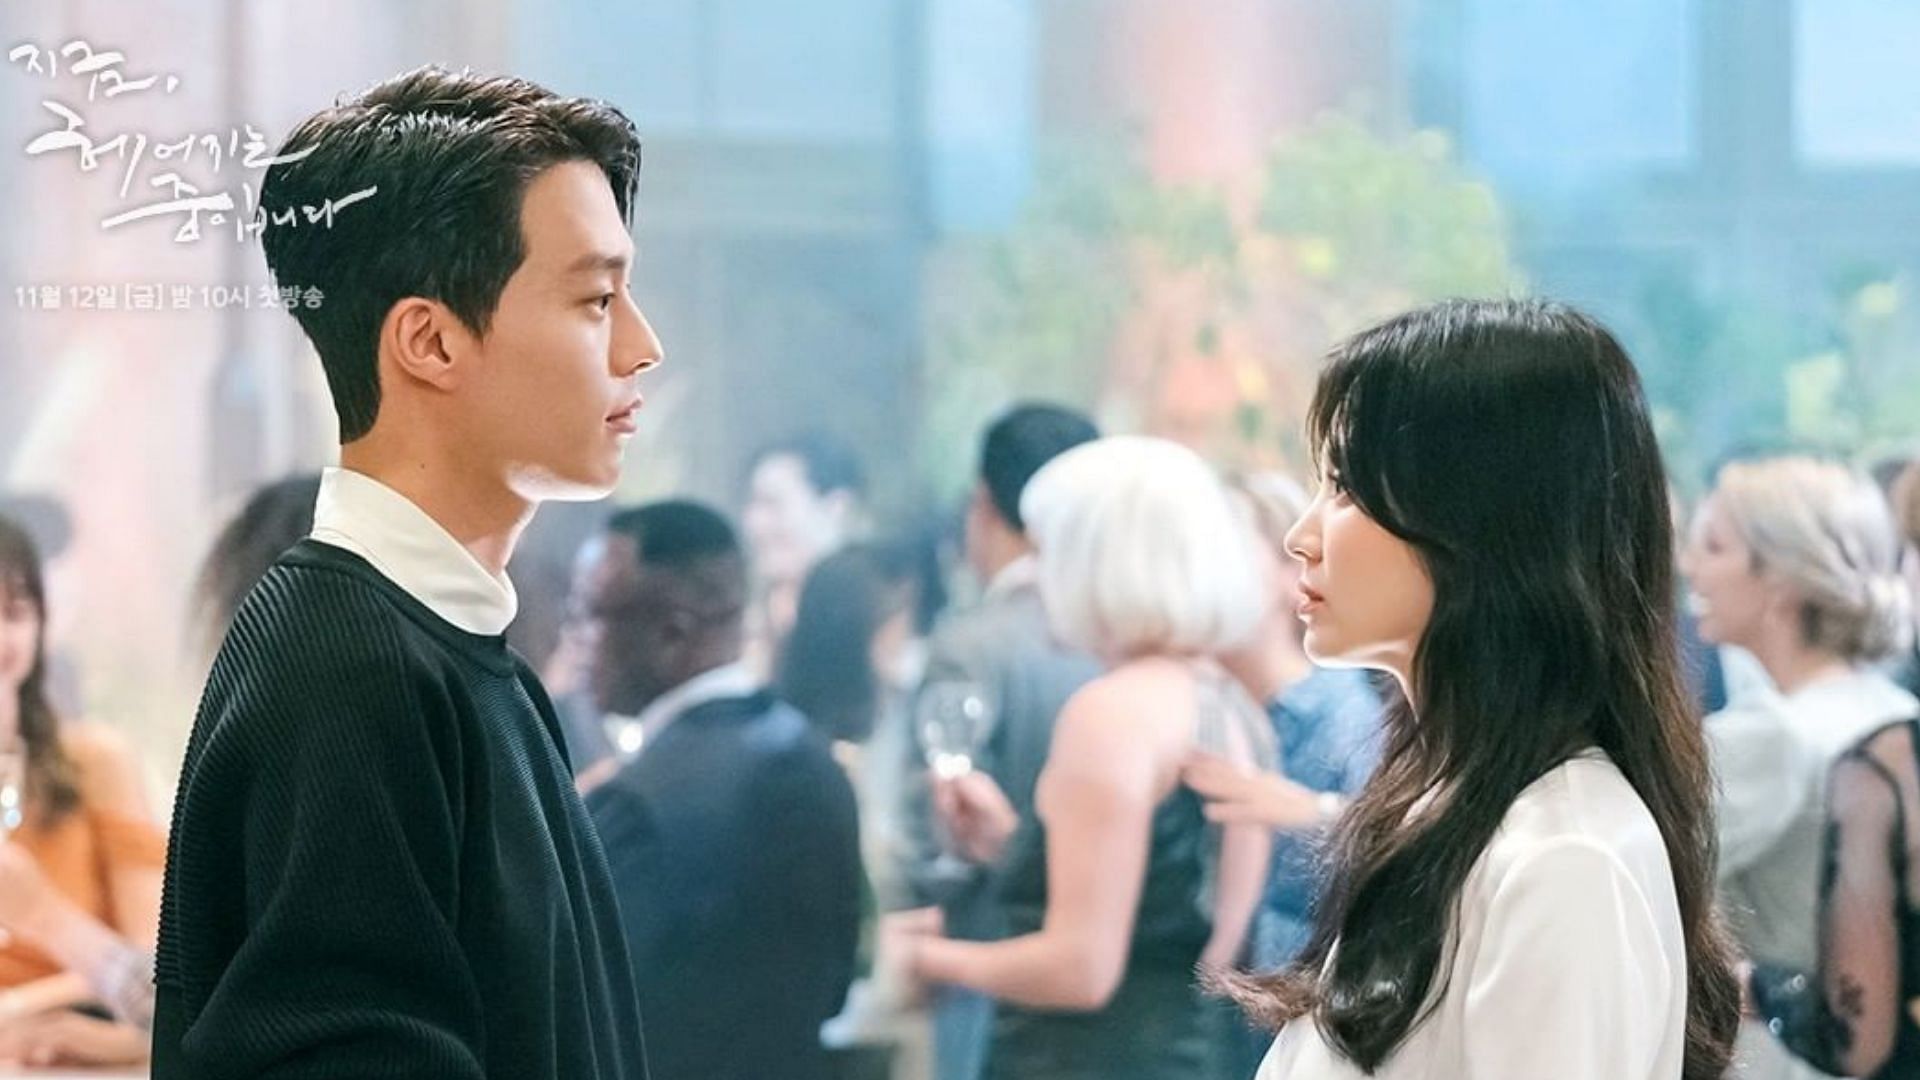 A still from Now We Are Breaking Up (Sbsdrama.official/Instagram)